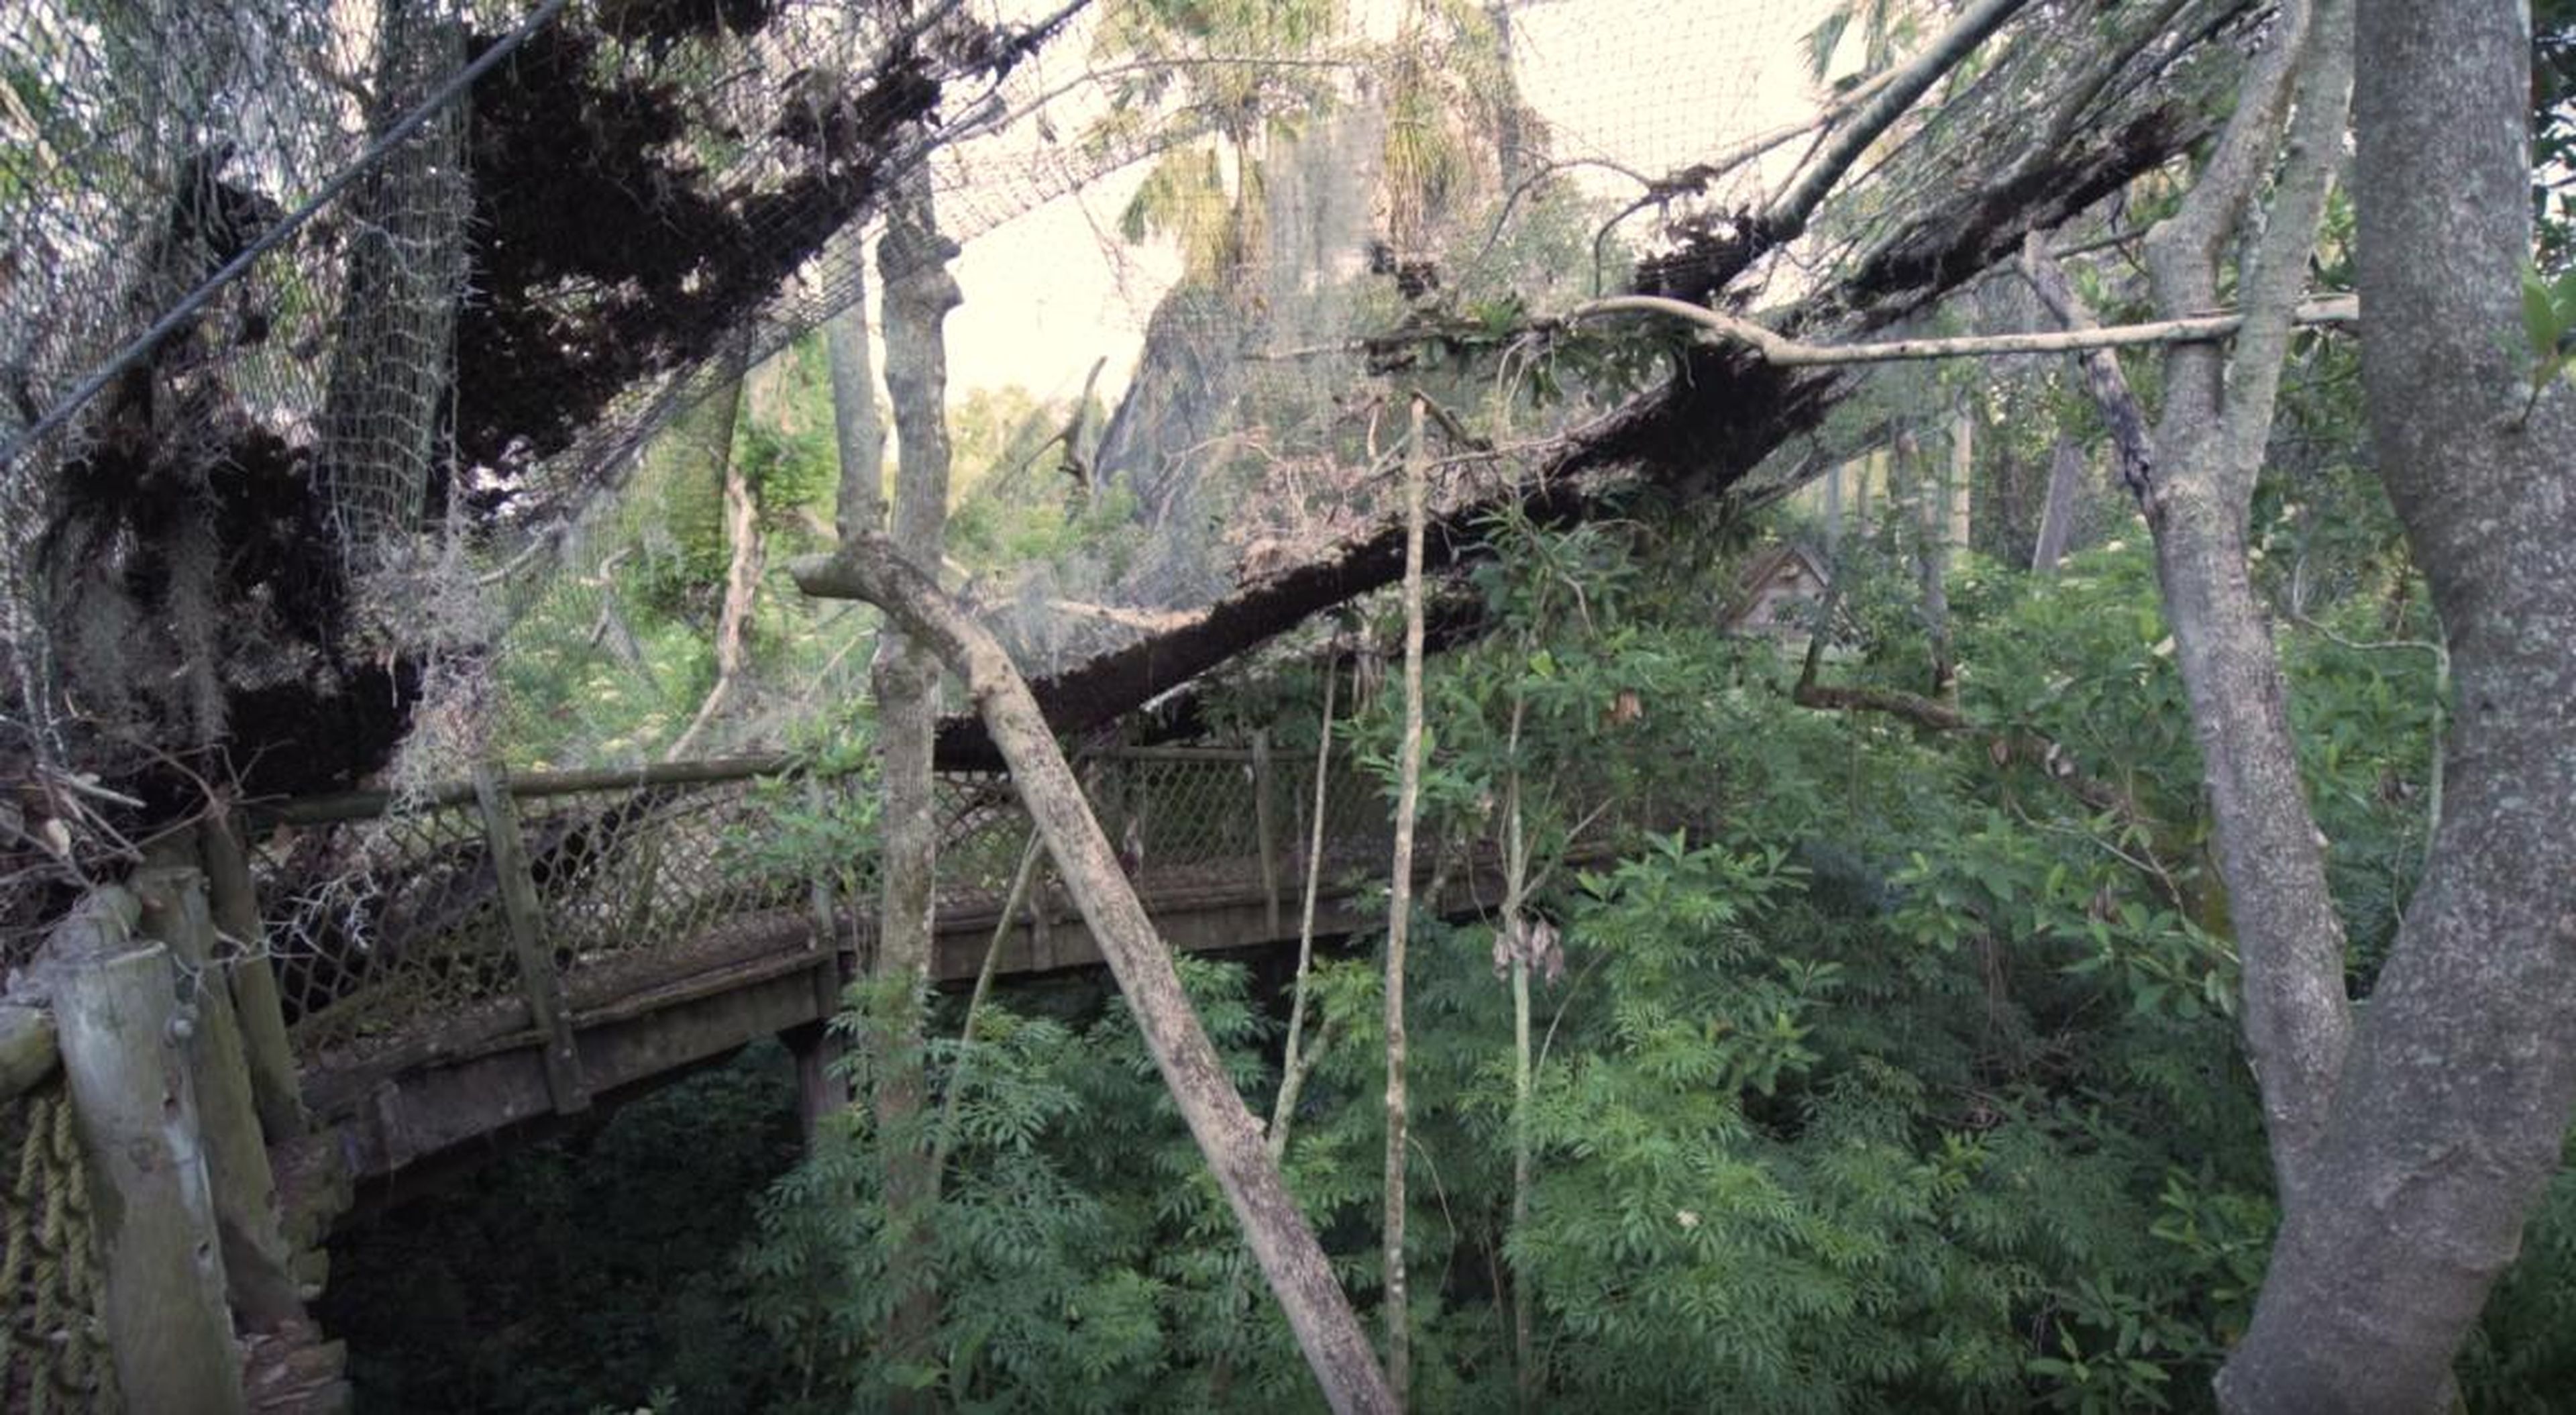 Collapsed canopy on Avian Way.